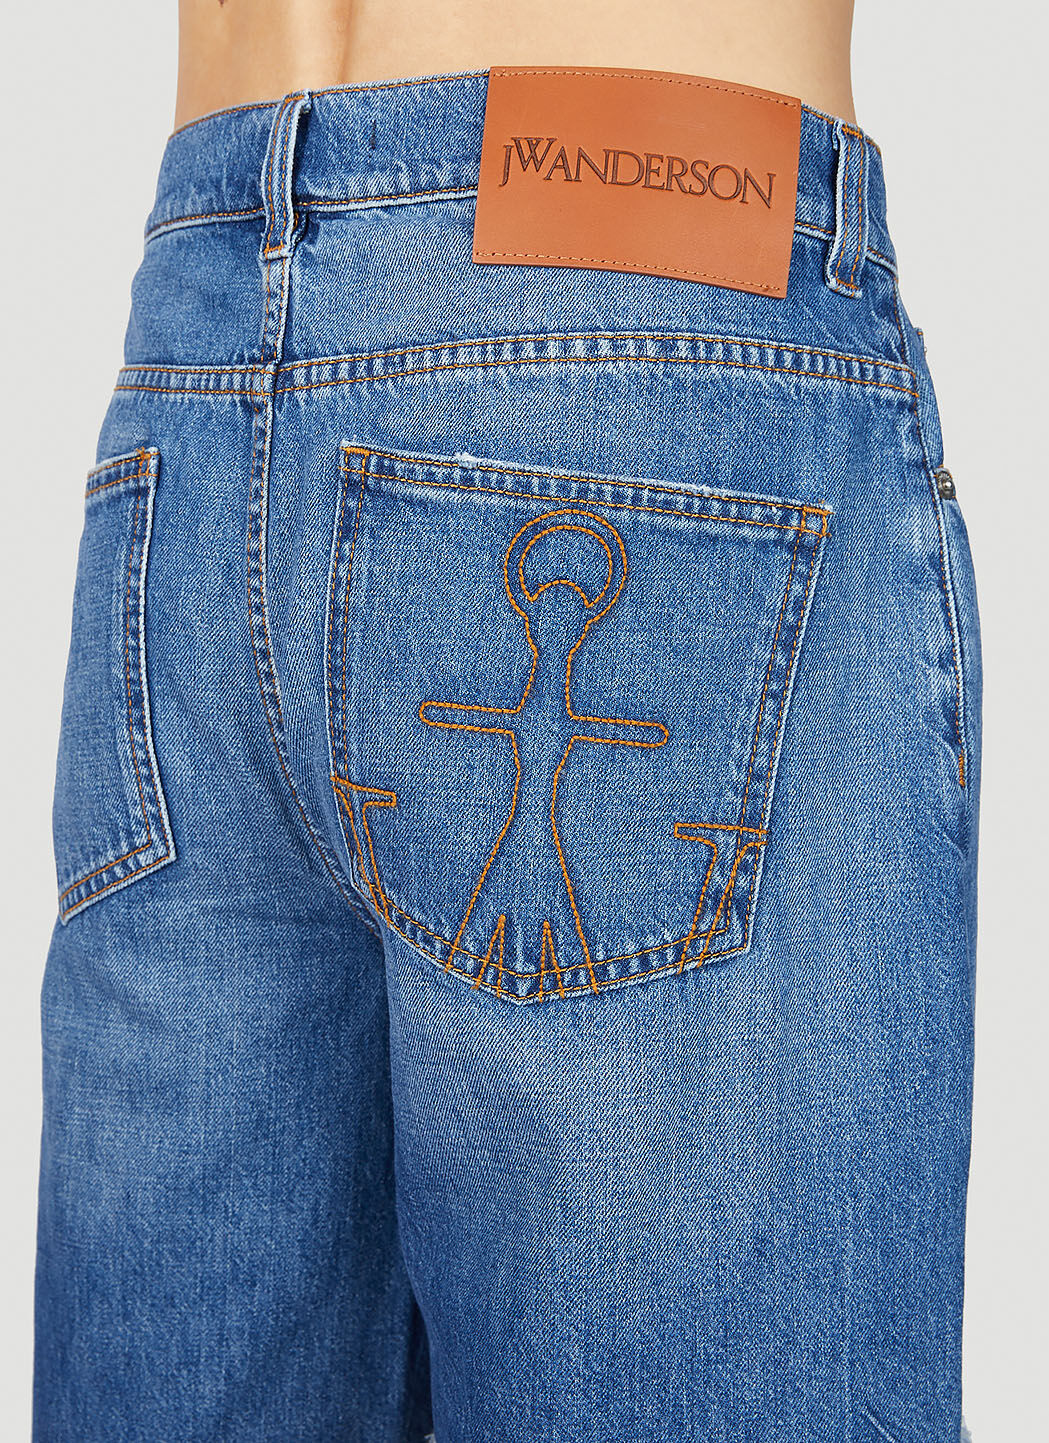 Distressed Patches Jeans